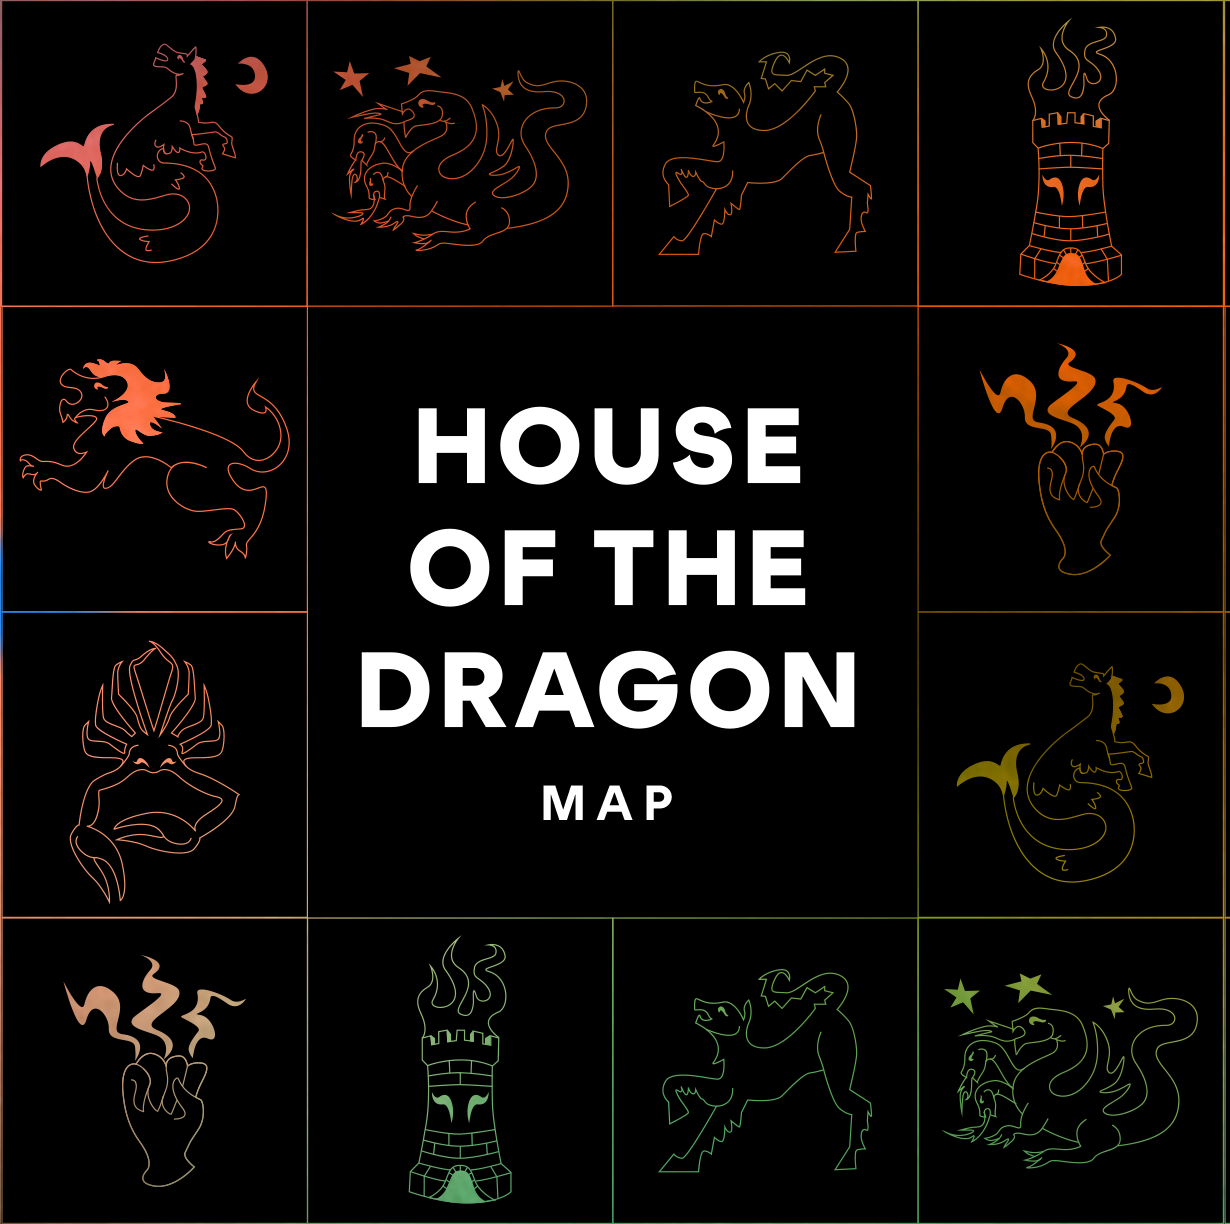 We Made a ‘House of the Dragon’ Map, Because This Show Can Be Confusing as Hell